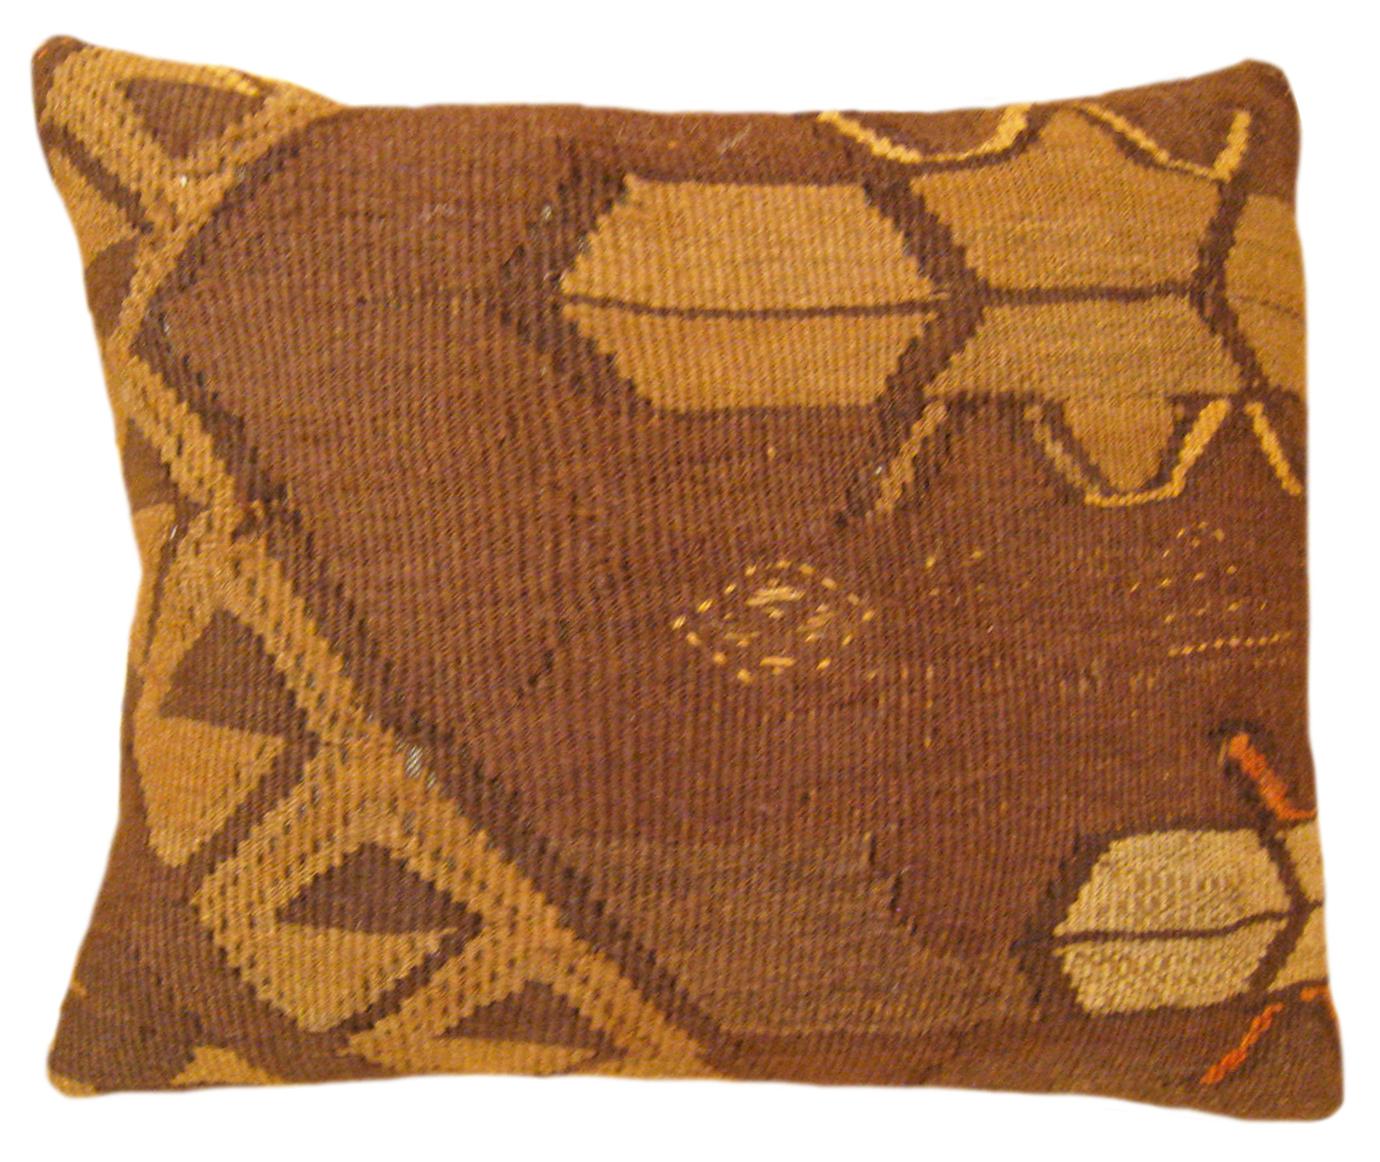 Pair of Decorative Vintage Turkish Kilim Pillows with Geometric Abstracts For Sale 2